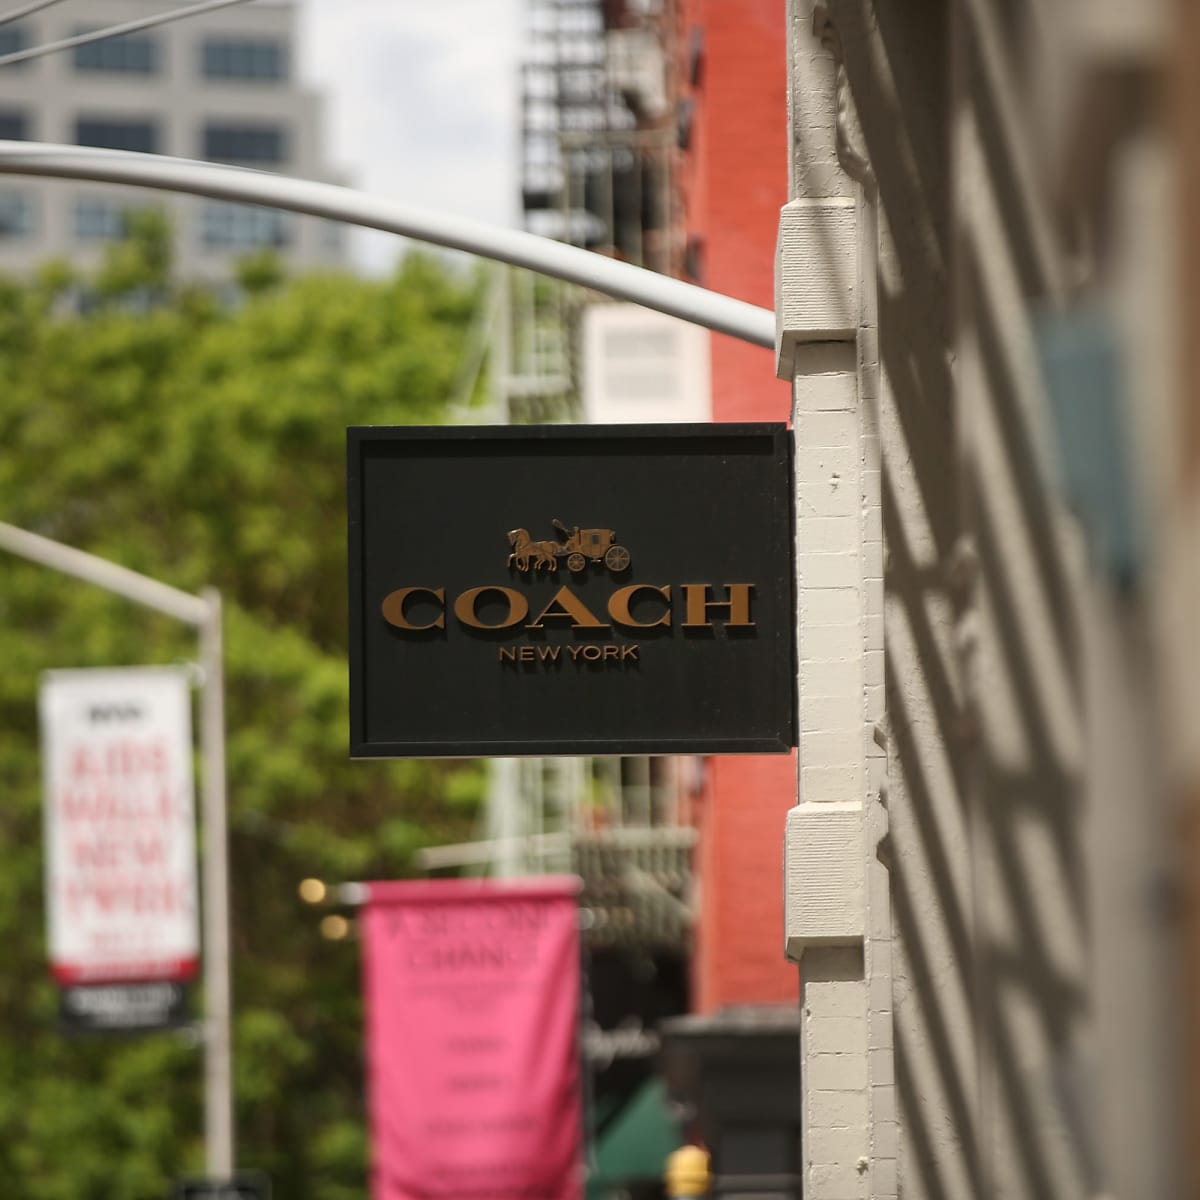 Coach is bringing its previously ubiquitous logo back to collections and ad  campaigns - Digiday